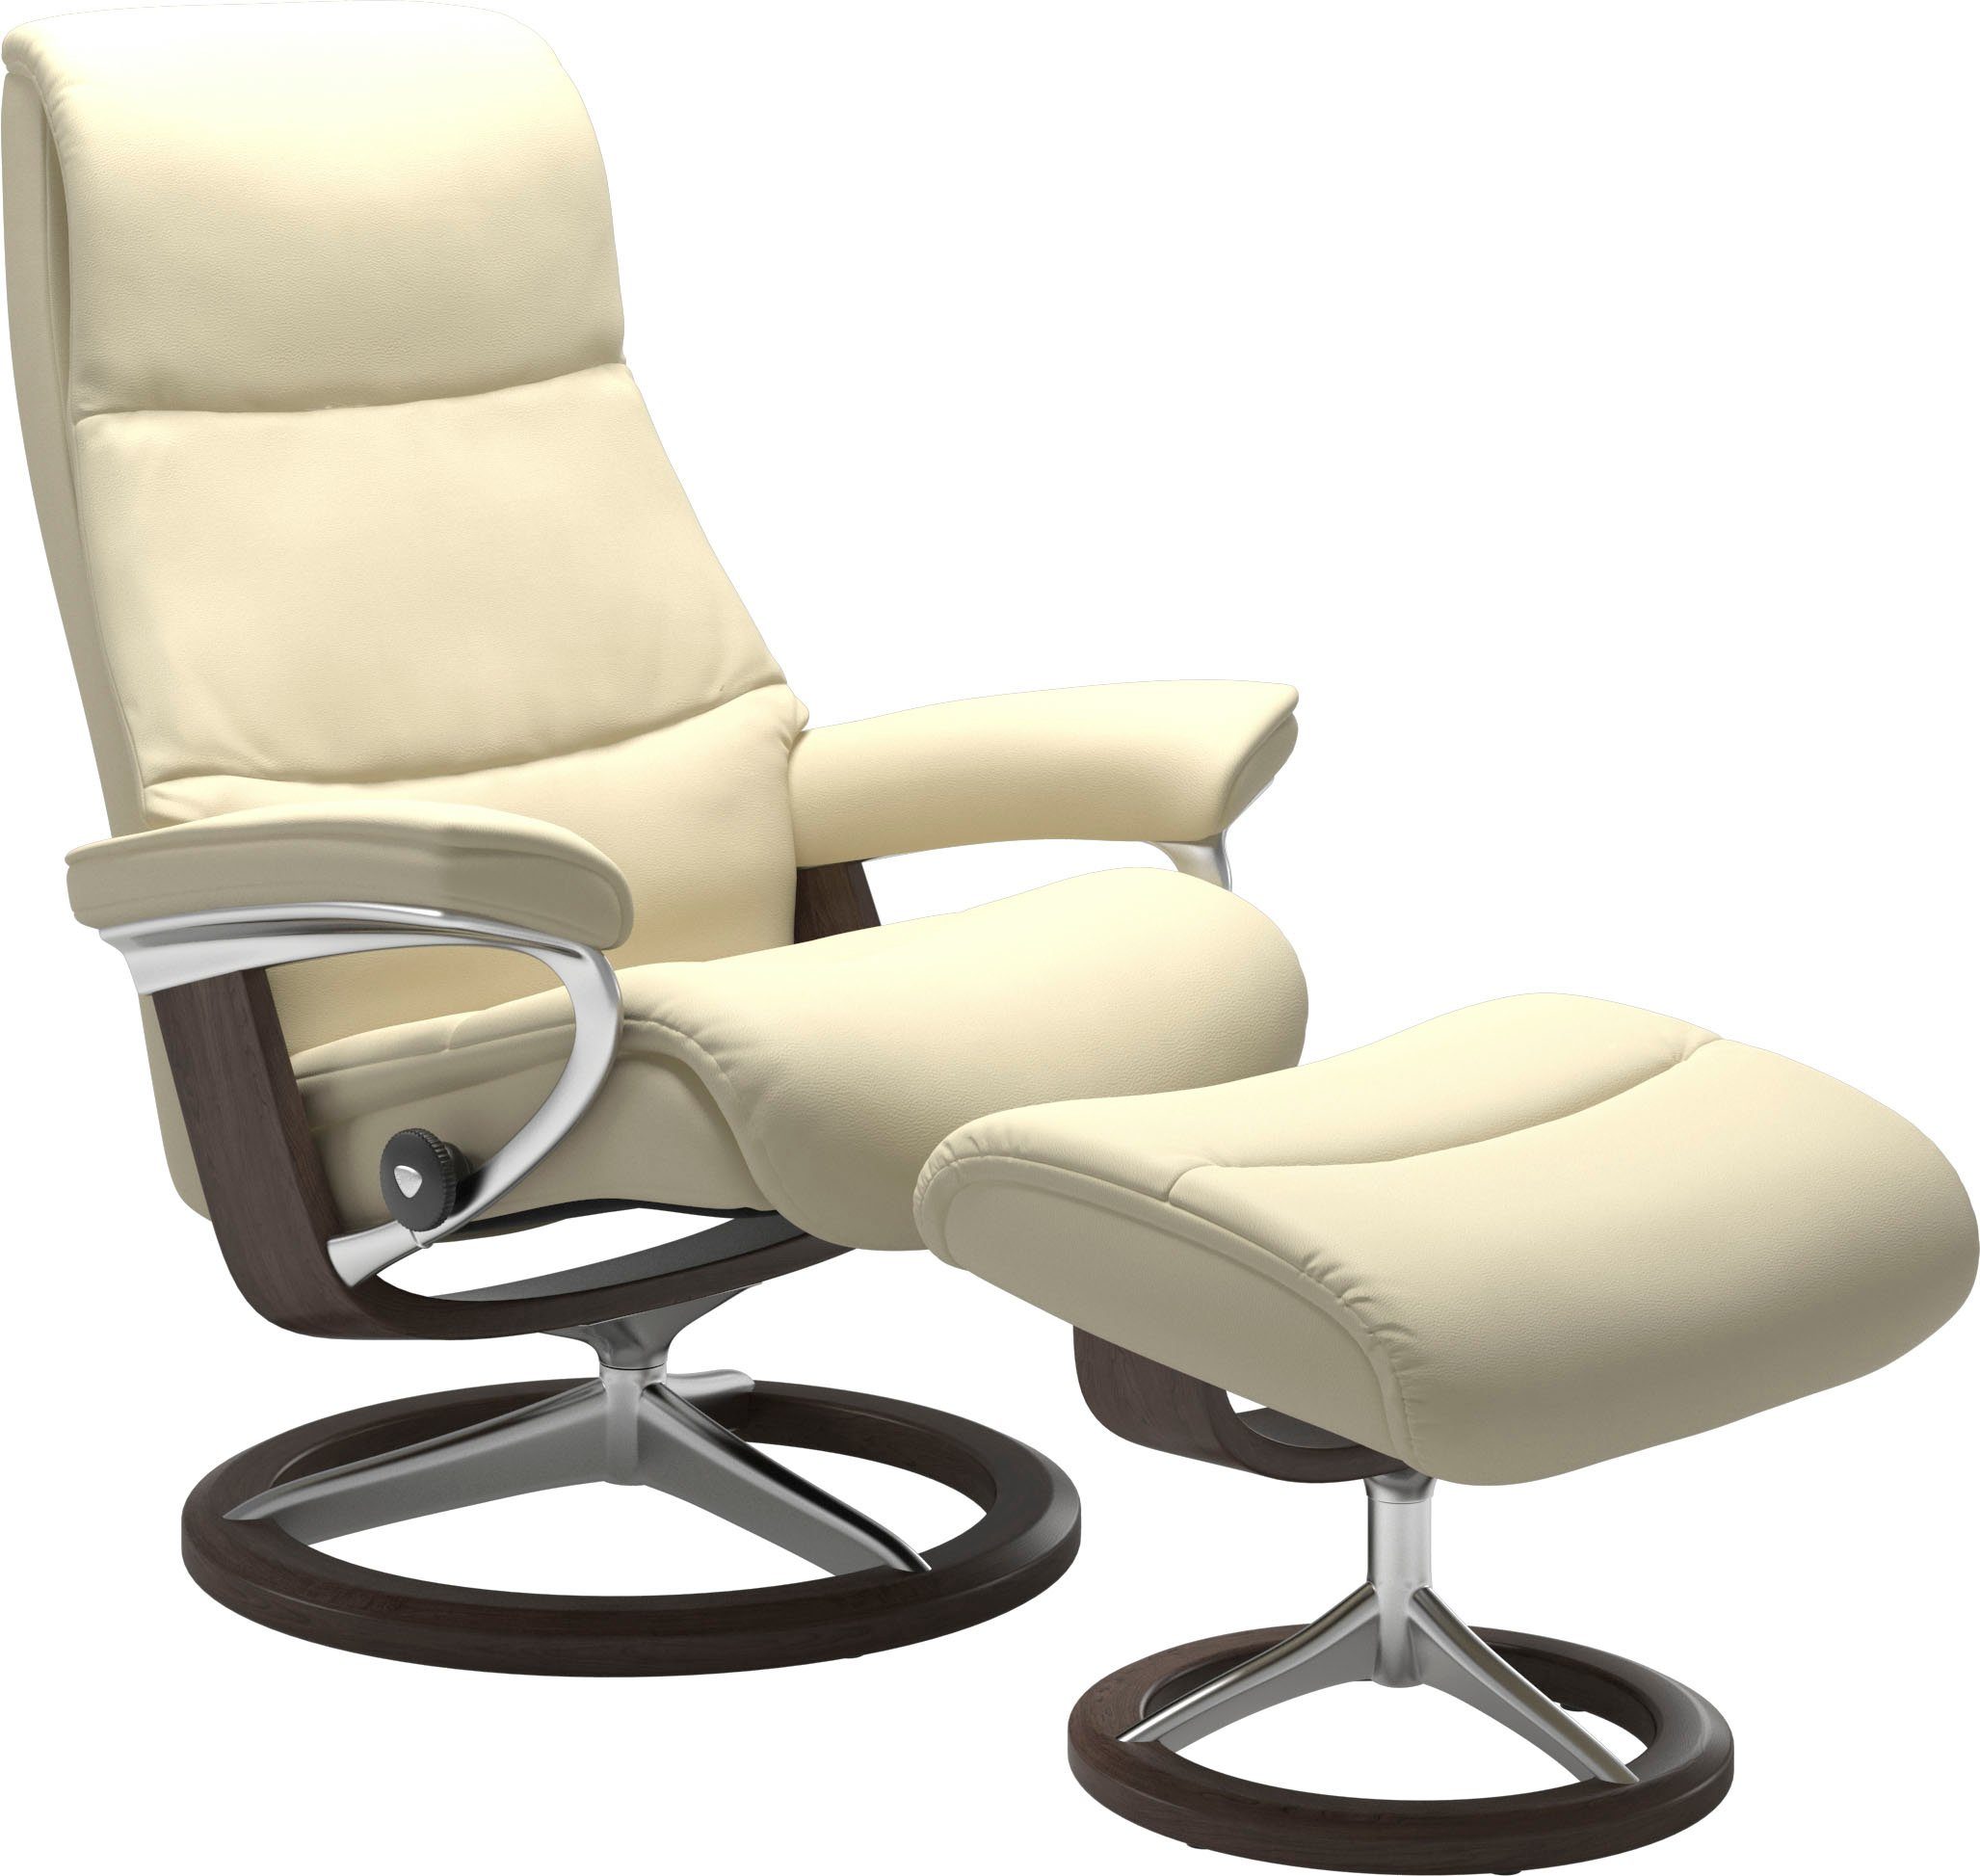 mit View, Größe Signature Base, Relaxsessel Wenge Stressless® S,Gestell